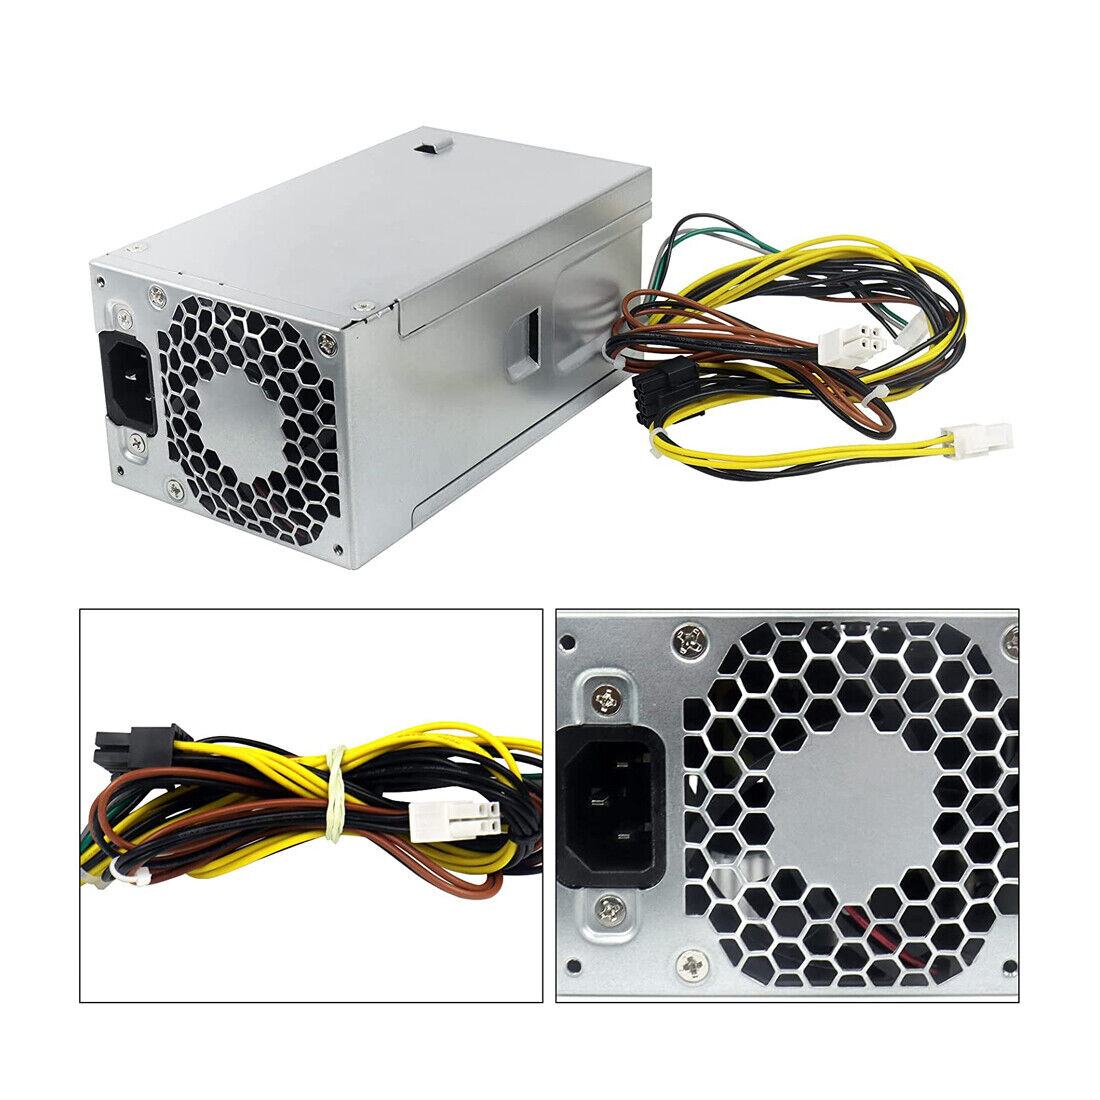 L04618-800 400W Power Supply For HP 280 288 285 480 600 680 800 G3 G4 942332-001